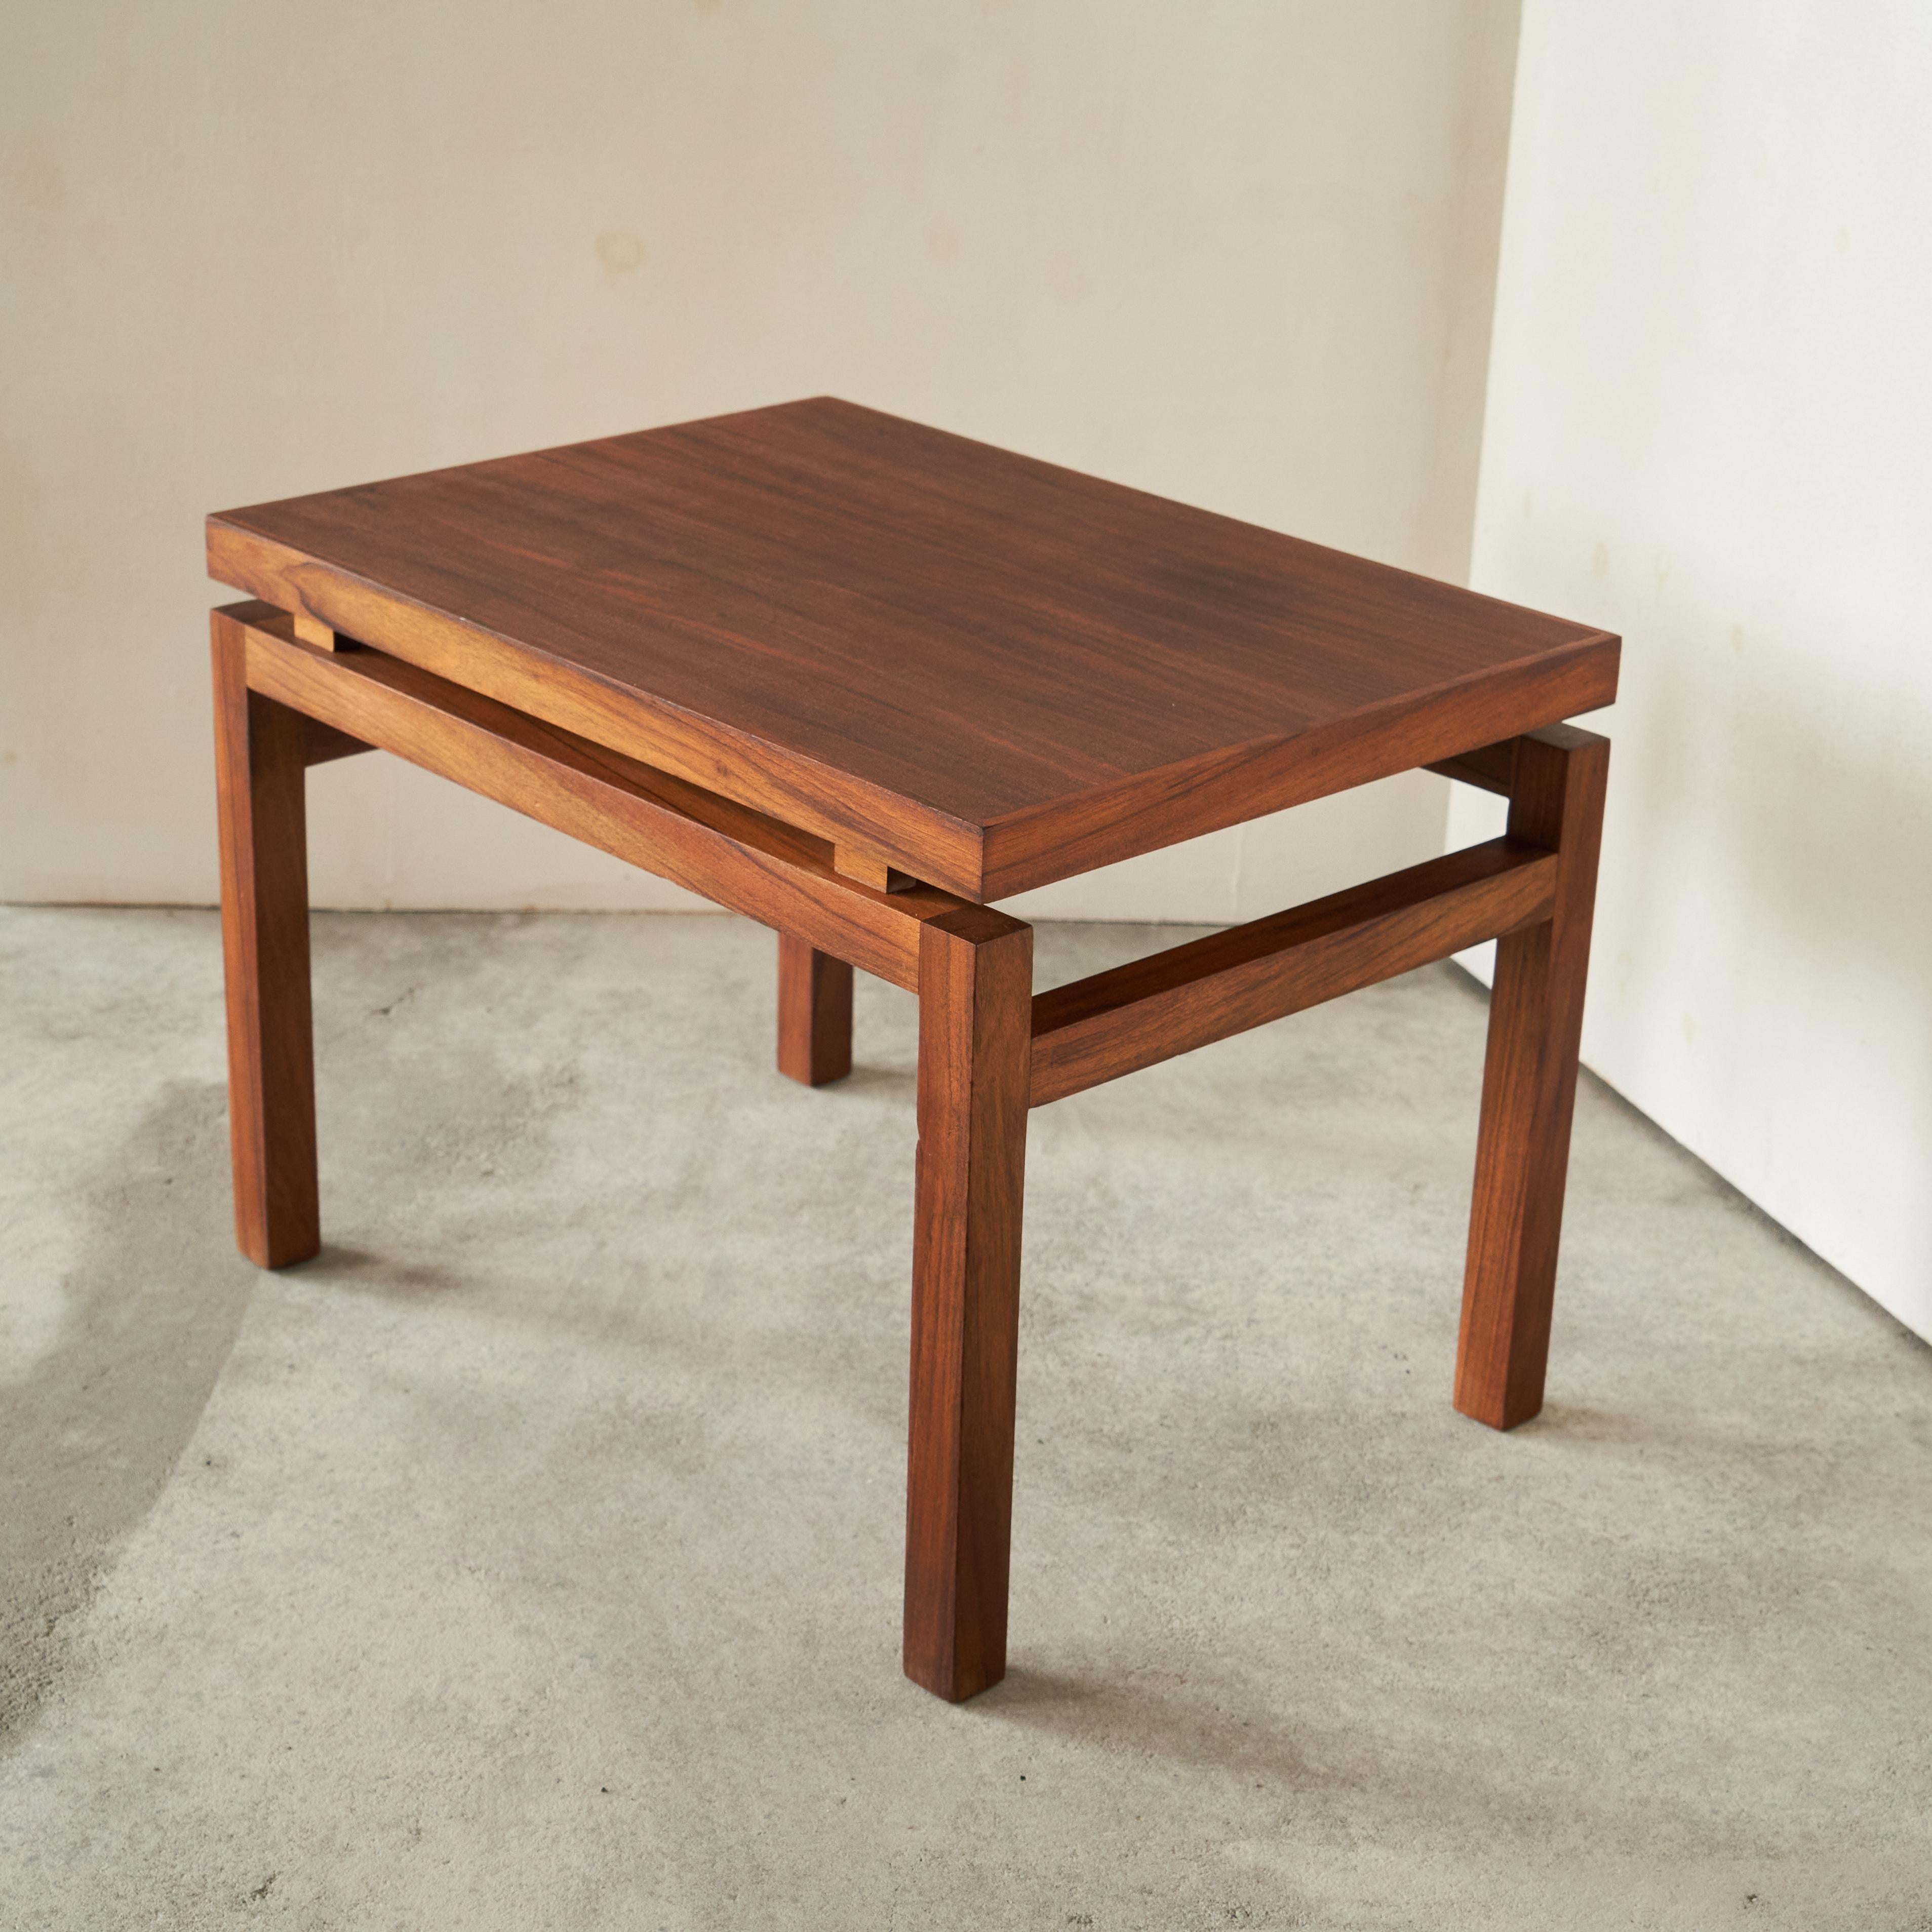 Hand-Crafted Belgian Modernist Coffee or Side Table in Walnut 1960s For Sale